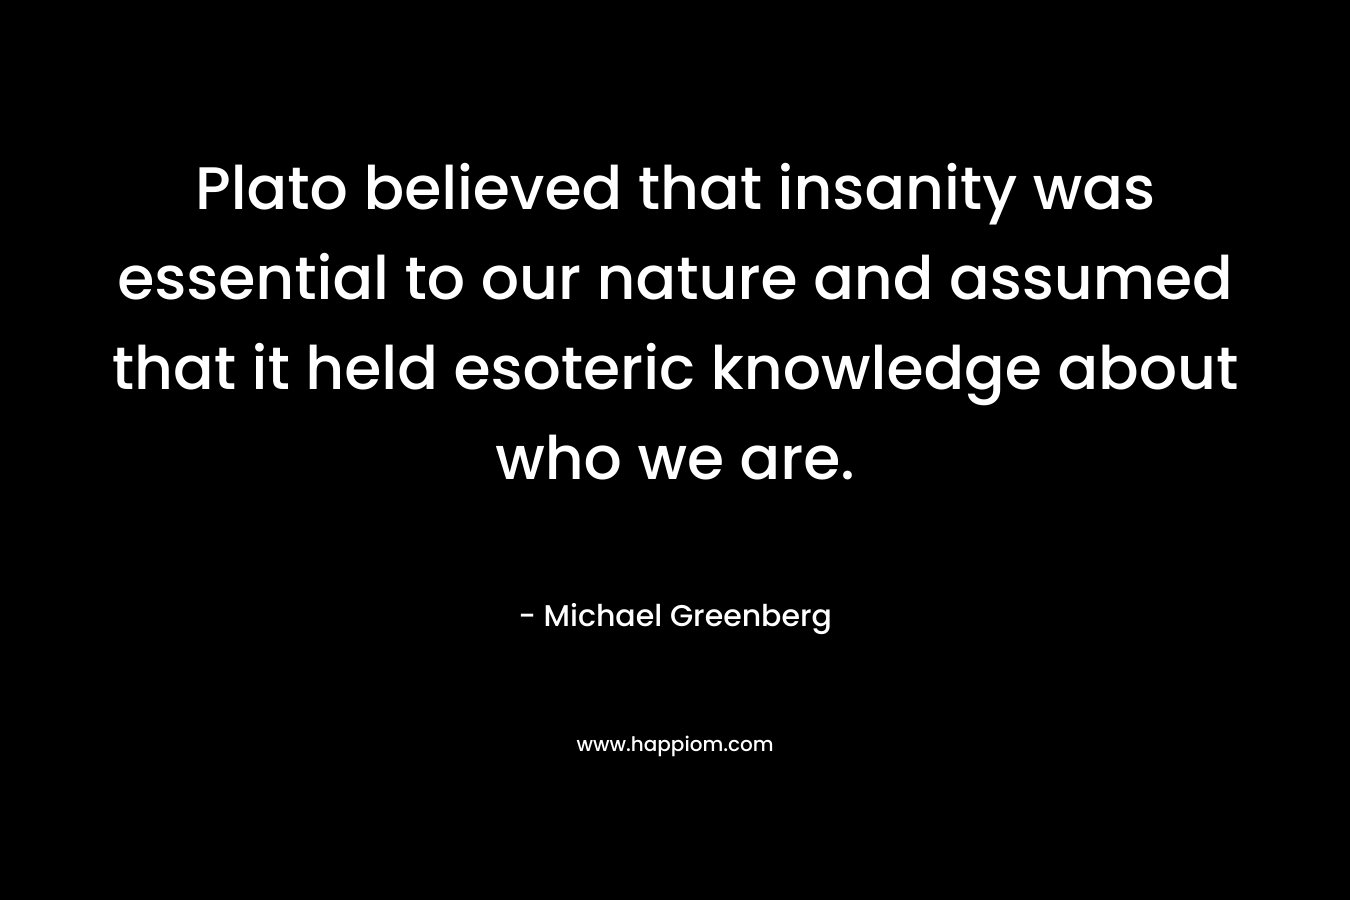 Plato believed that insanity was essential to our nature and assumed that it held esoteric knowledge about who we are. – Michael  Greenberg